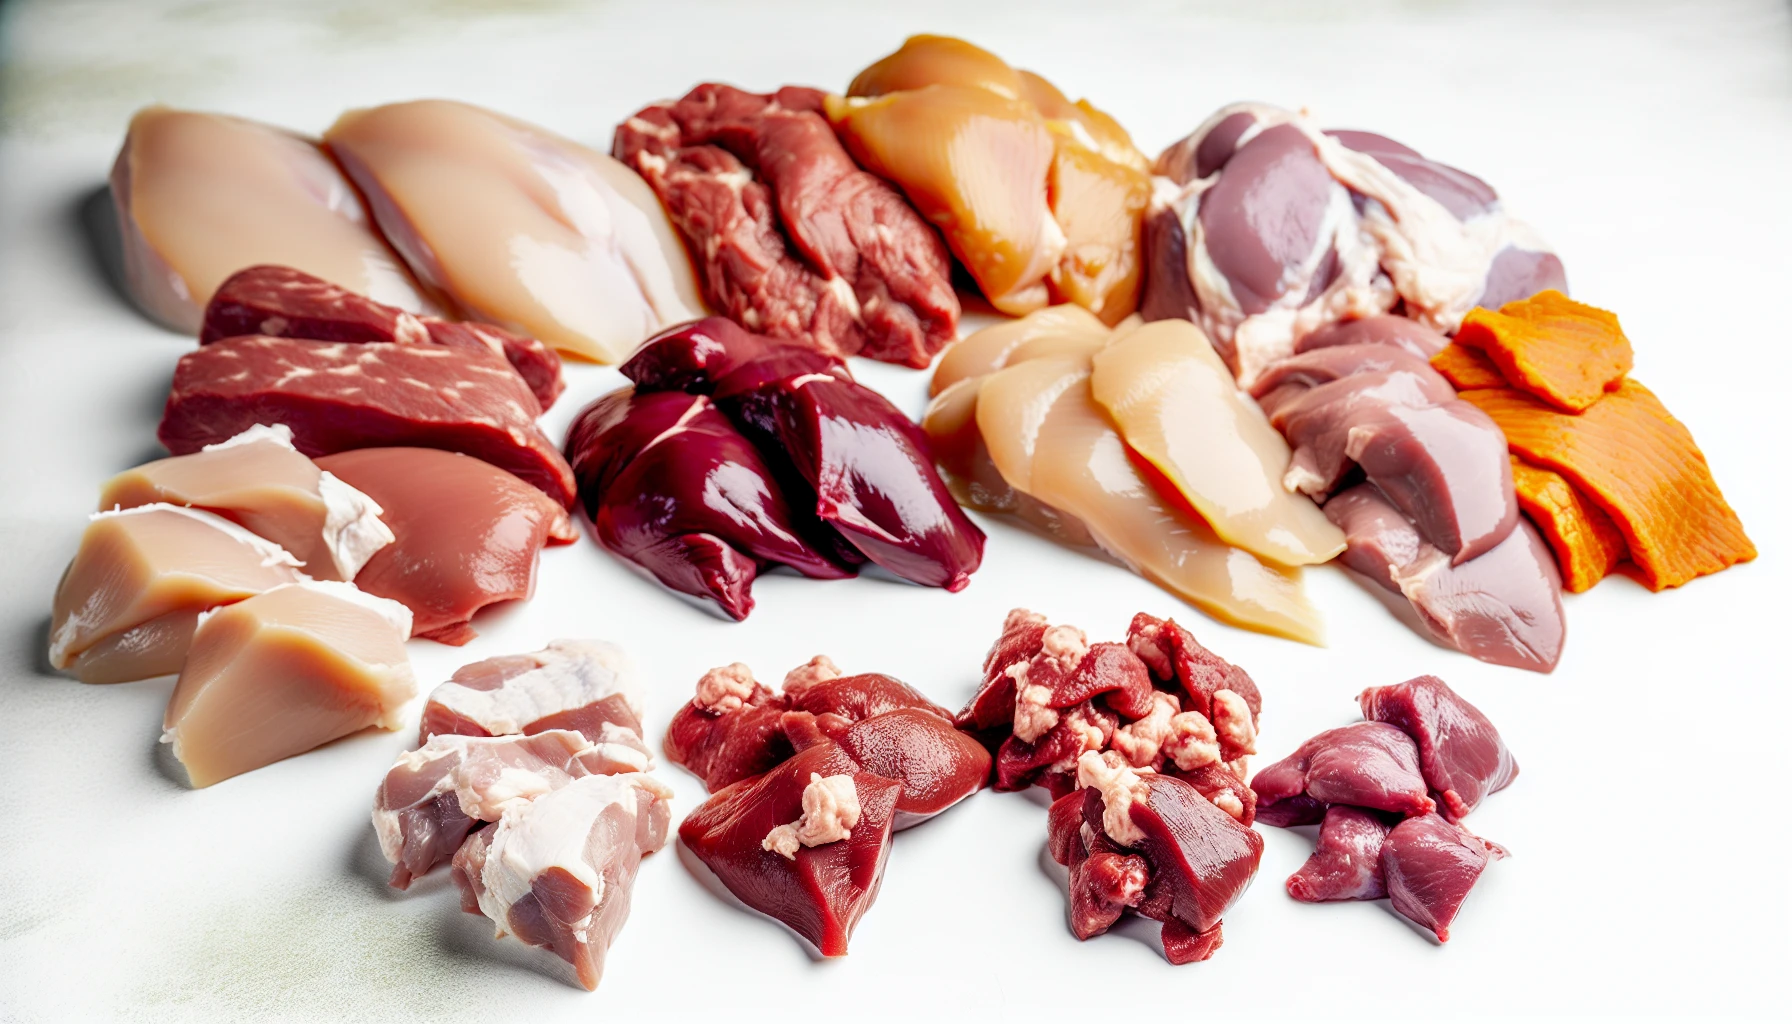 Lean meats and organ meats for homemade dog food